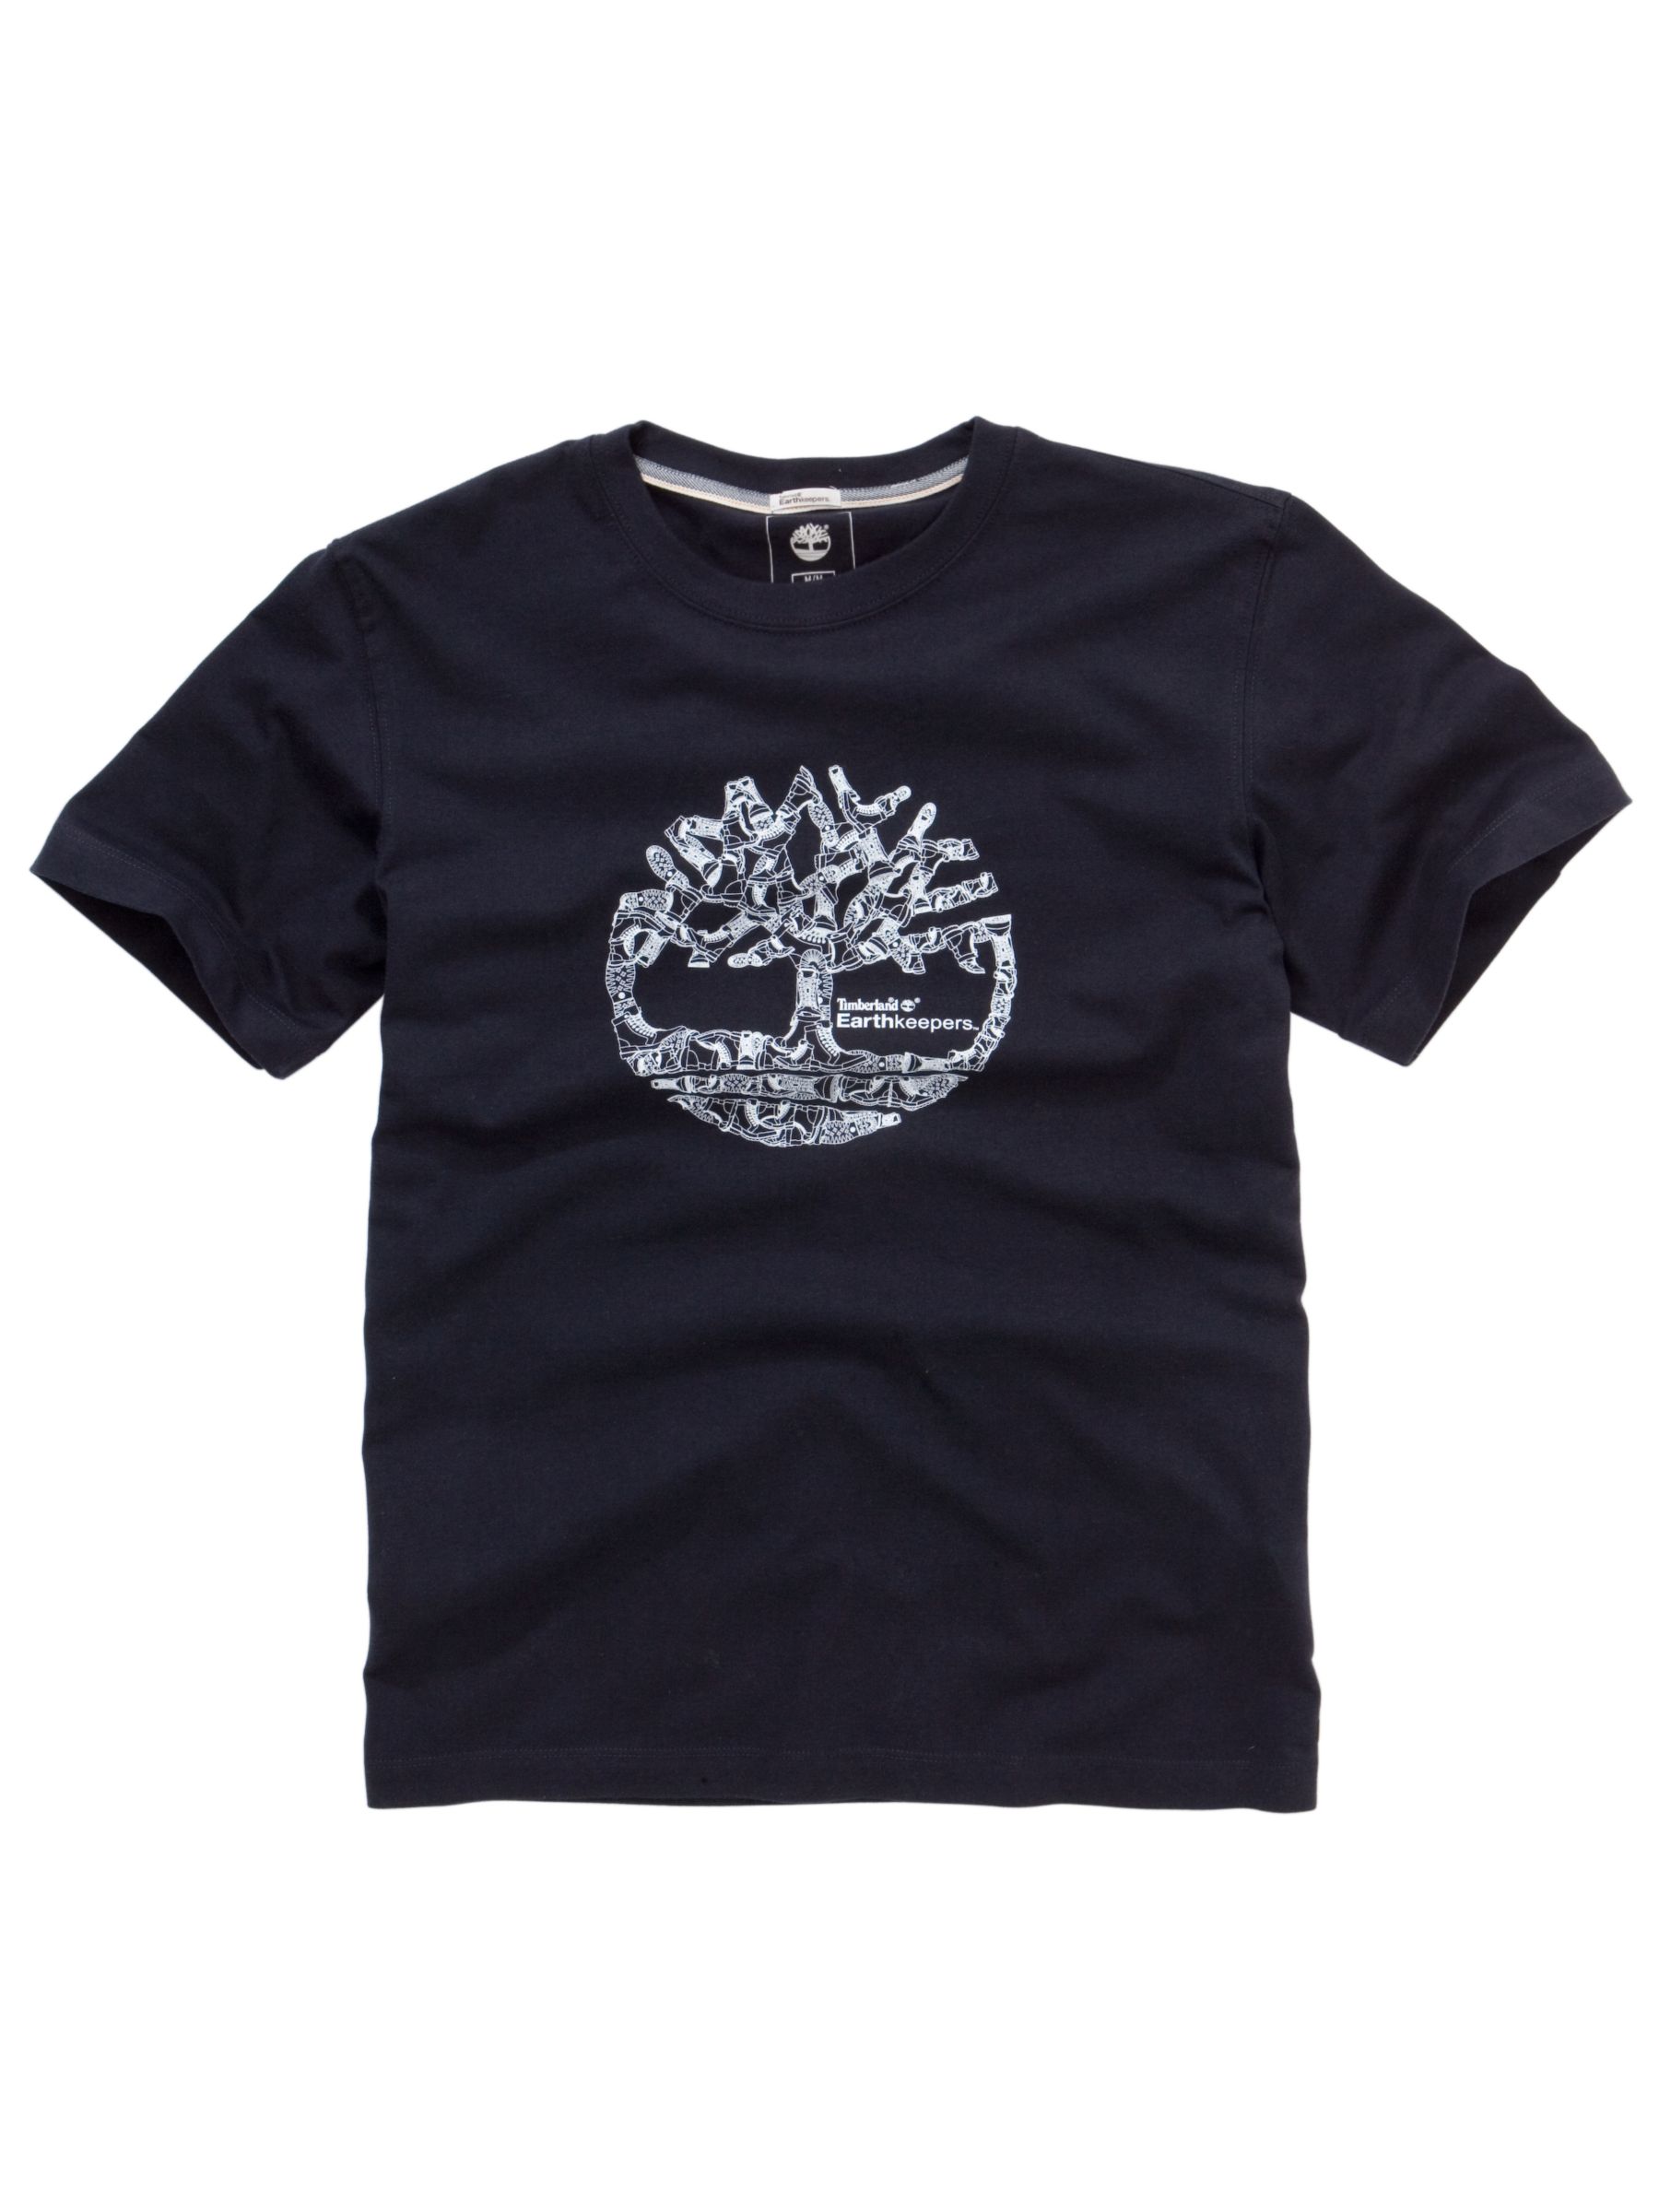 Earthkeepers Boot Tree T-Shirt, Navy